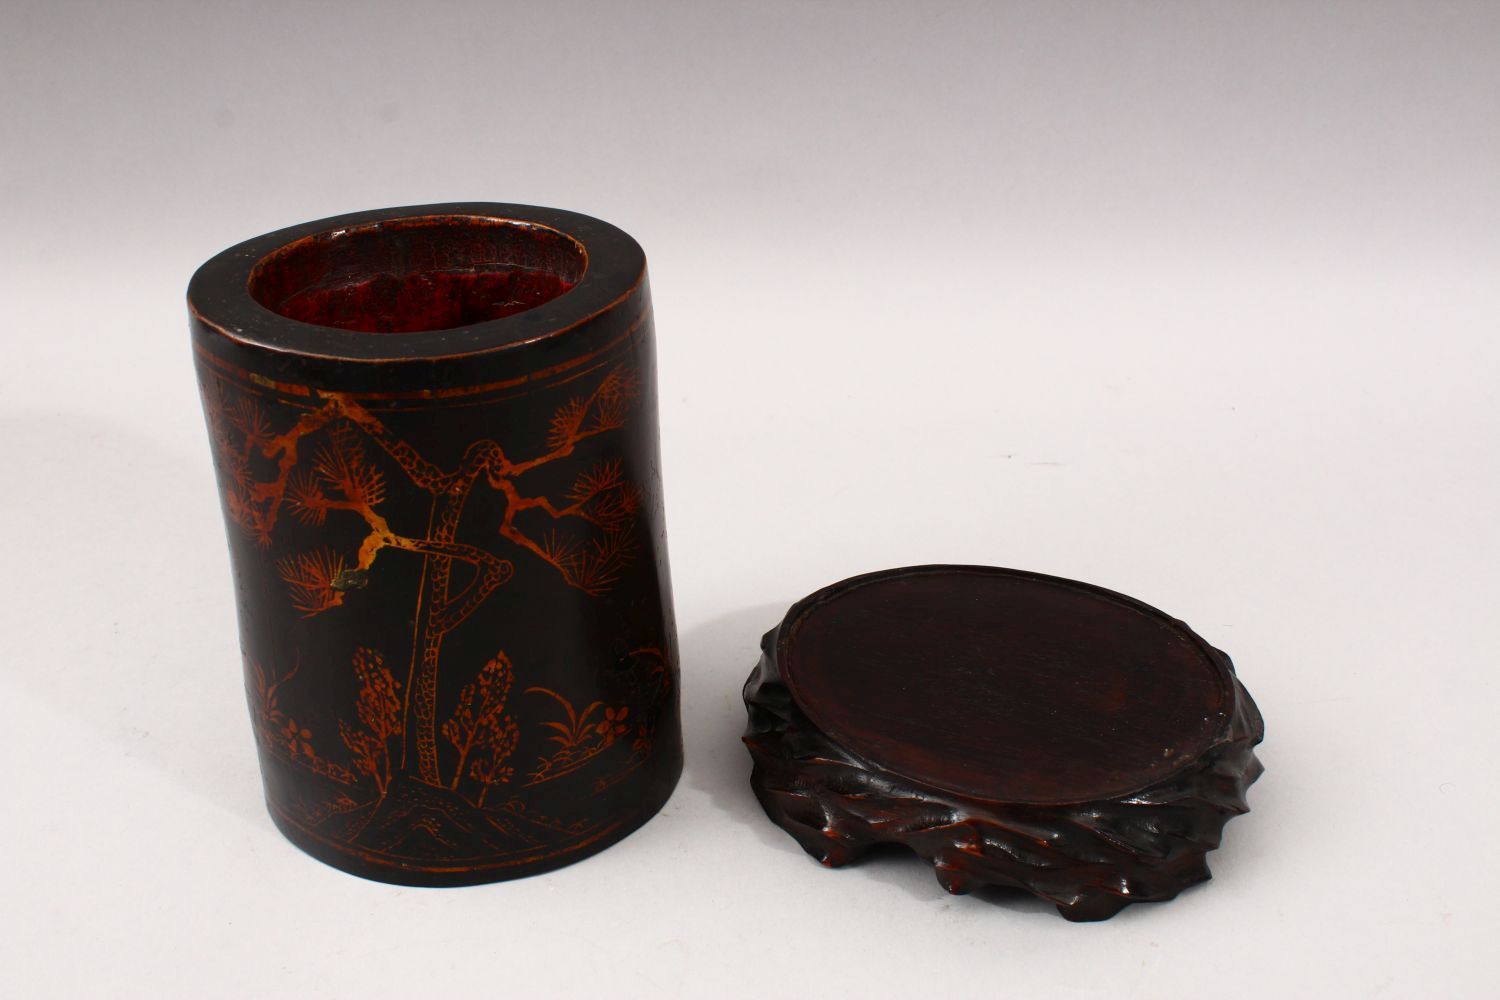 A GOOD 19TH CENTURY CHINESE LACQUER BRUSH POT & STAND, The pot decorated with gold lacquer to depict - Image 5 of 6